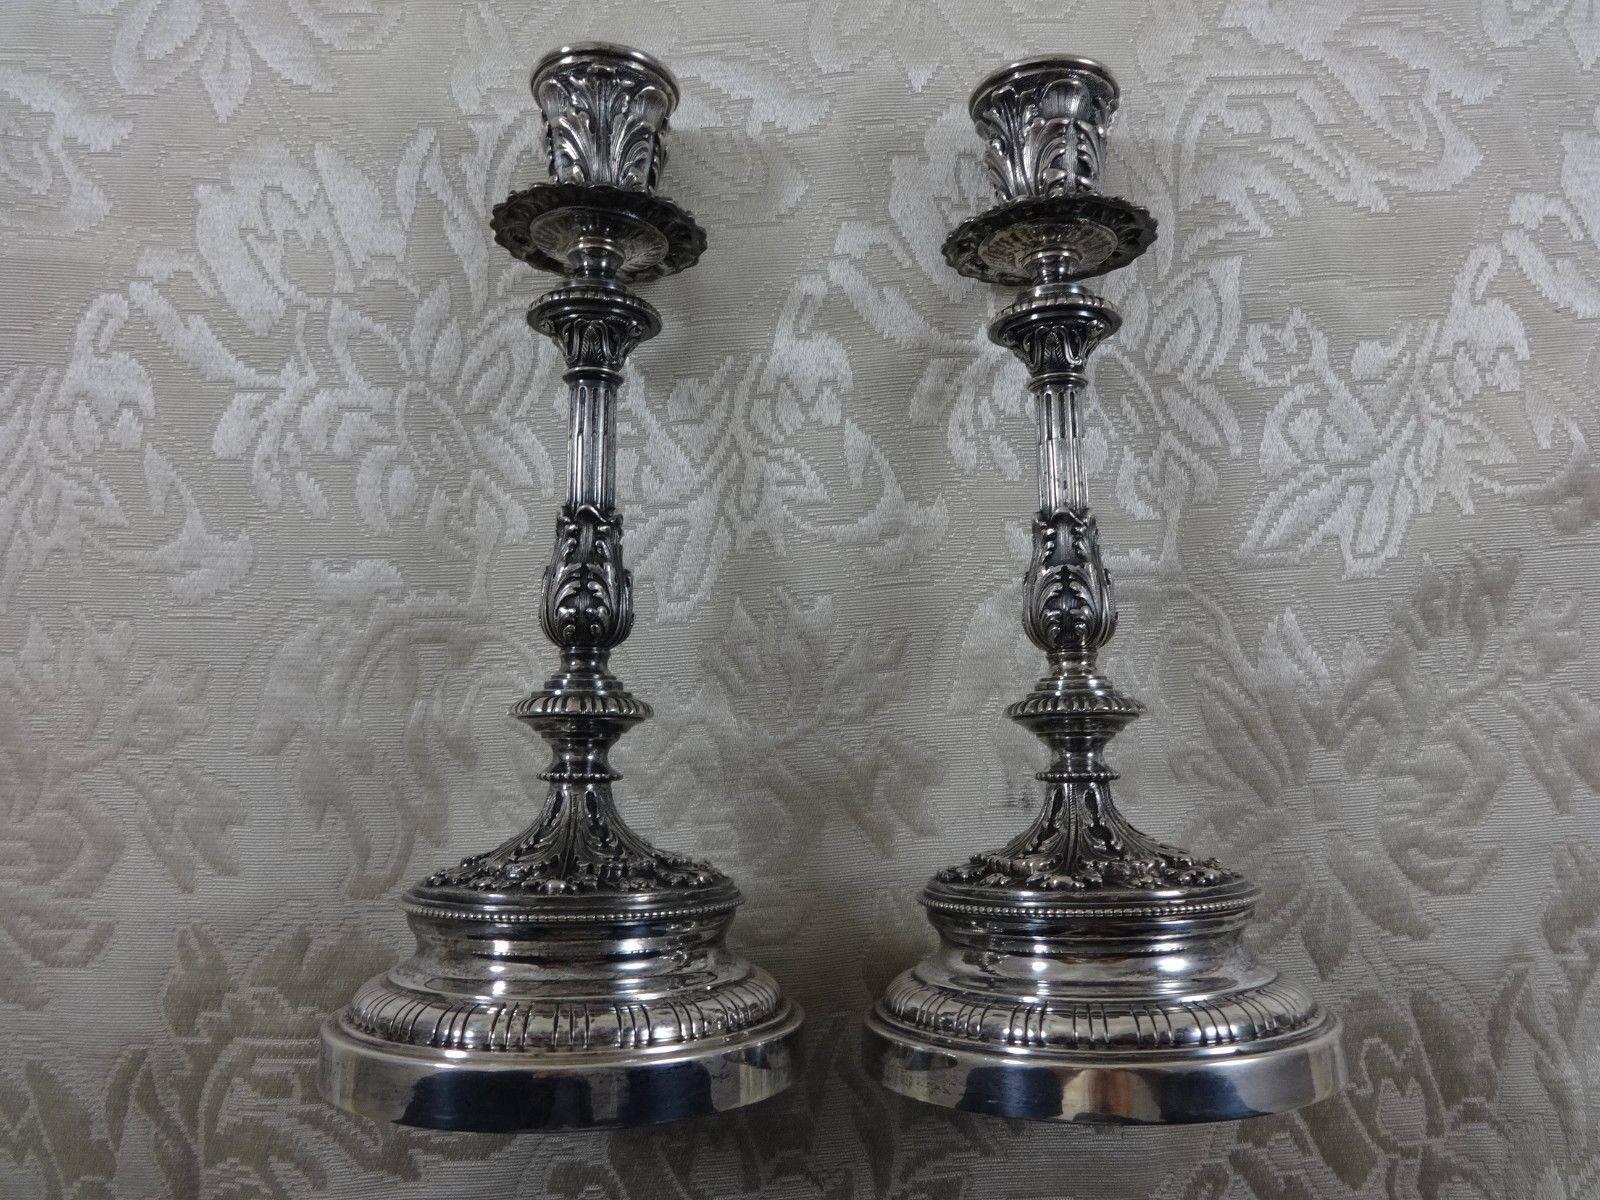 Grande Imperiale Buccellati Sterling Silver Candlesticks Pair, Italy Hollowware 1